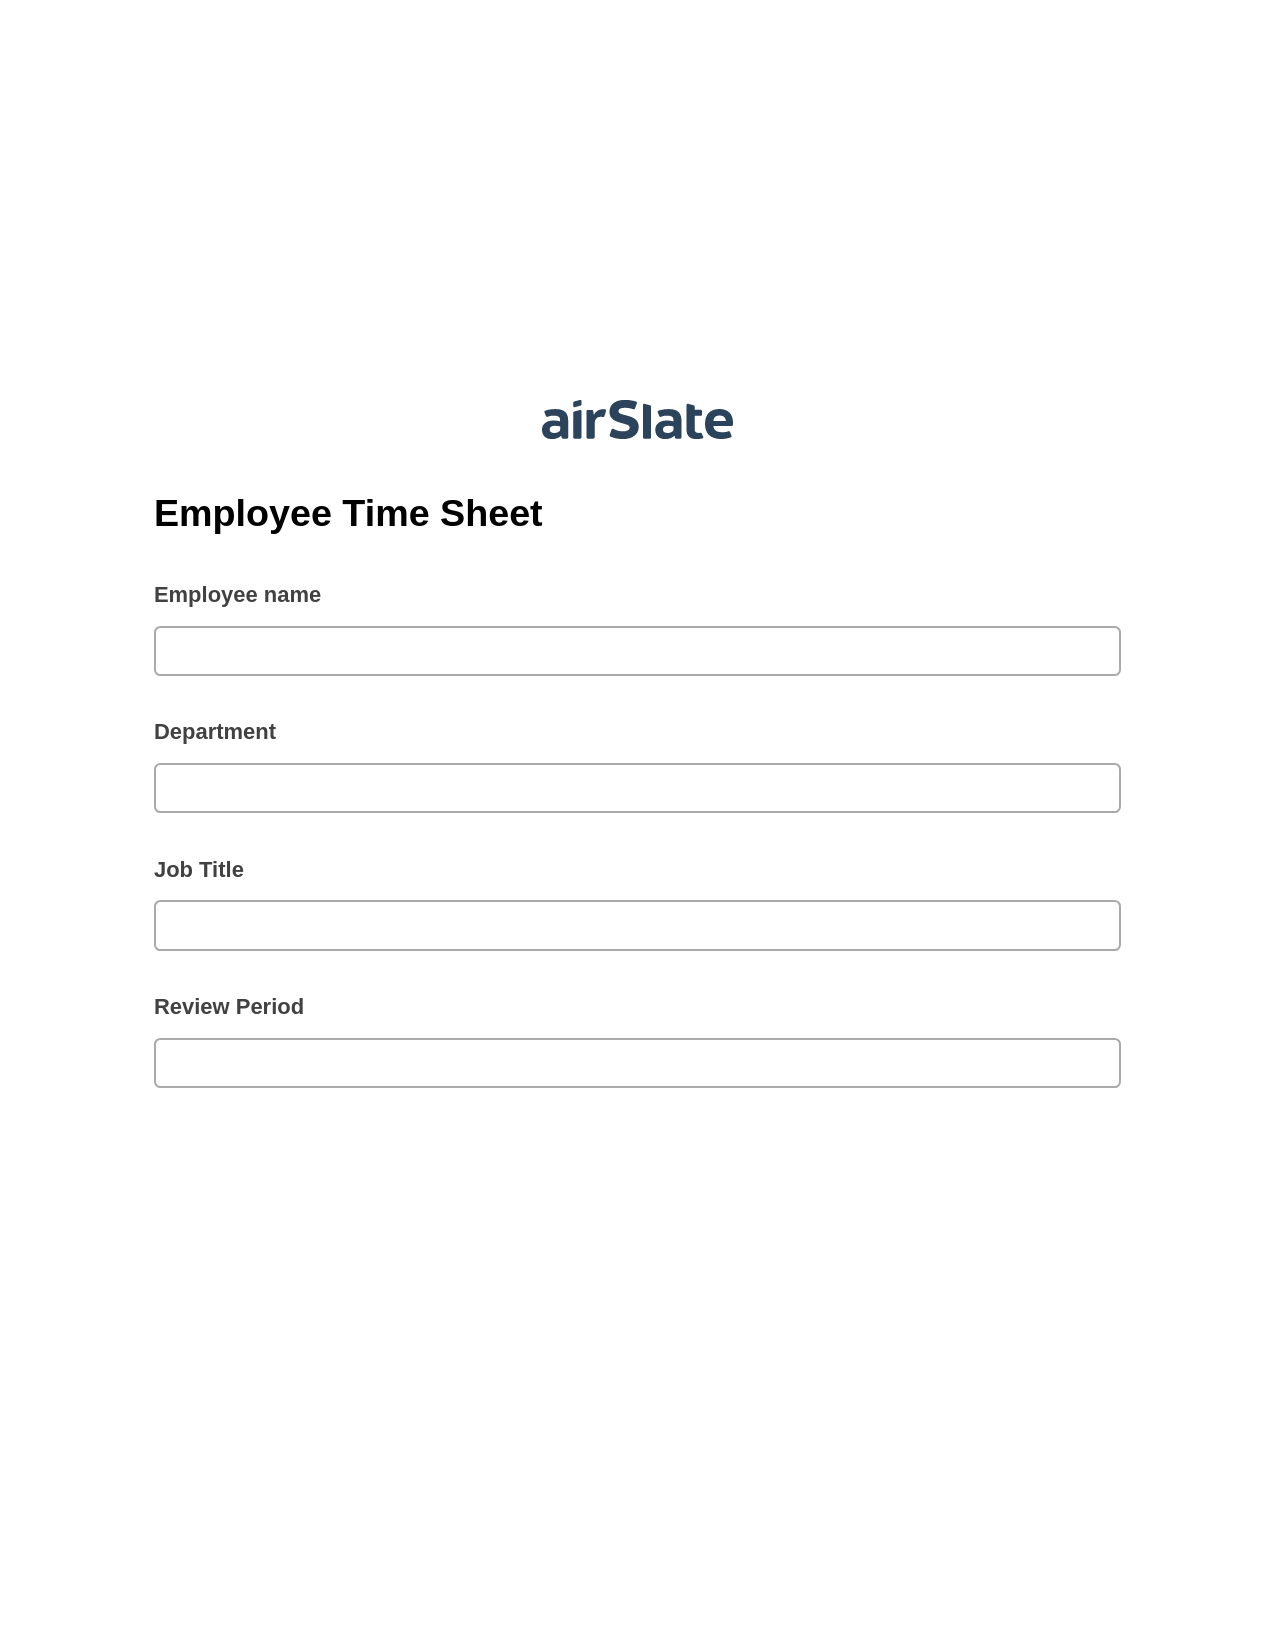 Multirole Employee Time Sheet Pre-fill from Excel Spreadsheet Bot, Create NetSuite Record bot, Export to Google Sheet Bot